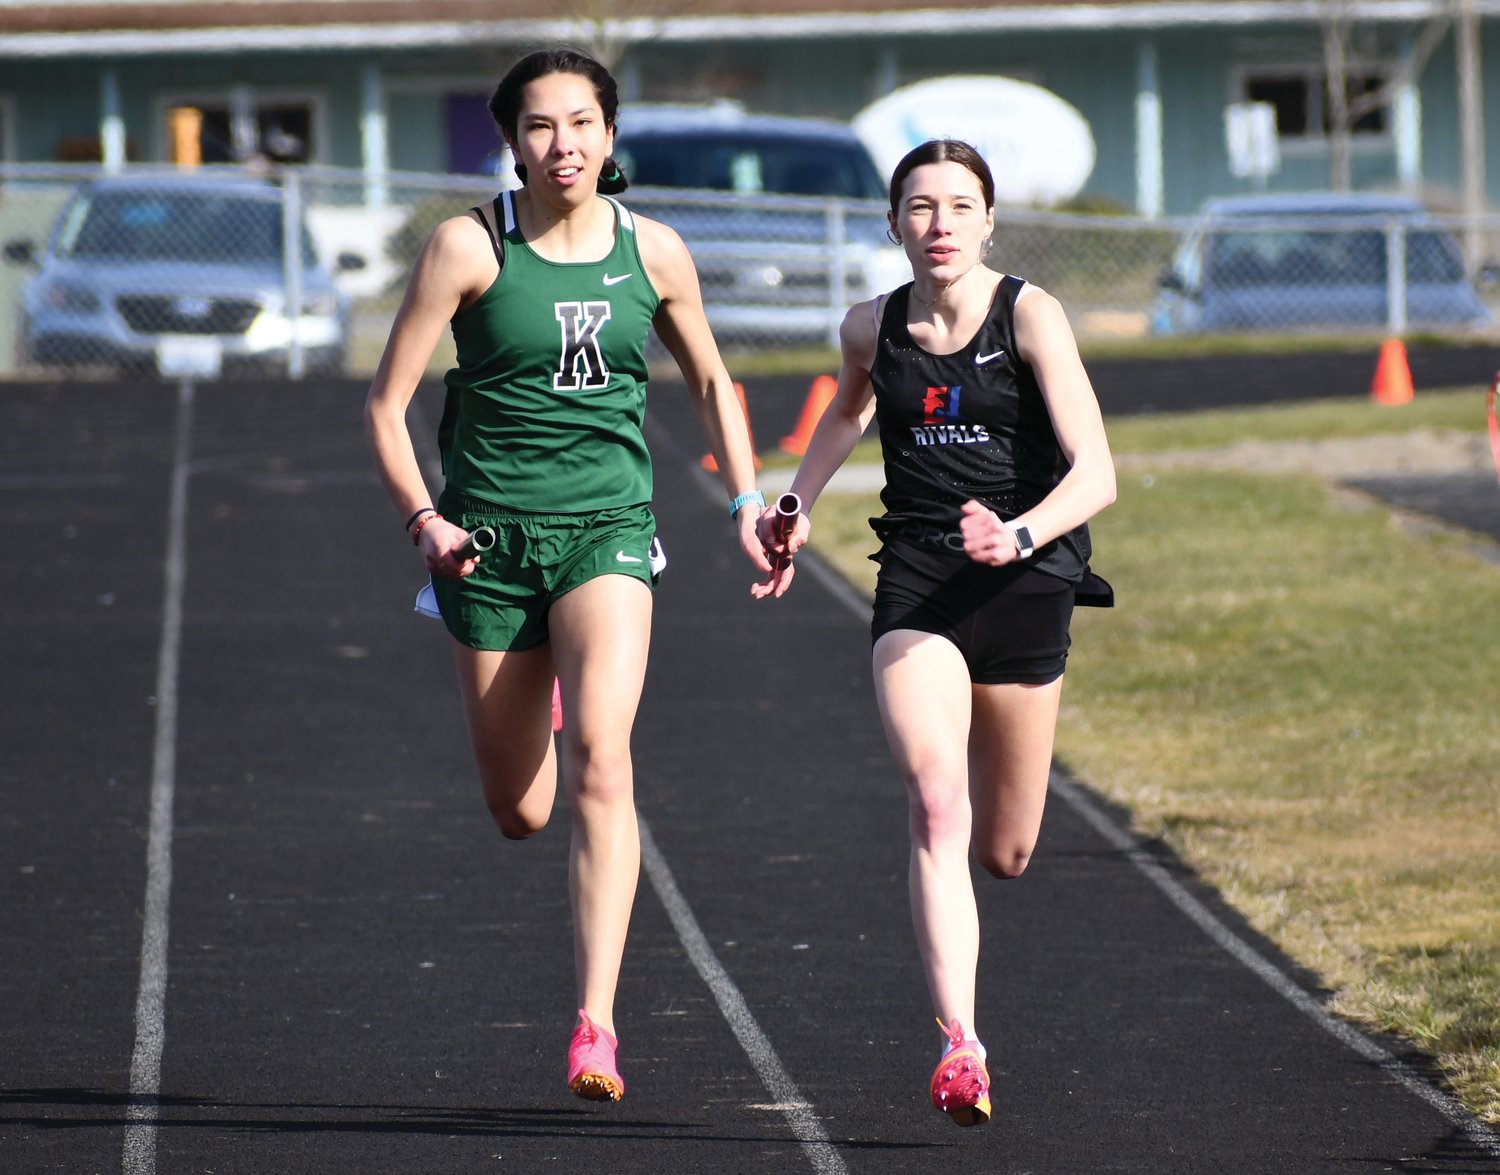 EJ junior Aliyah Yearian runs neck-and-neck with Klahowya junior Amelia Mayes during the girl’s 1600-meter race, which Yearian won with a time of 5:21.28.